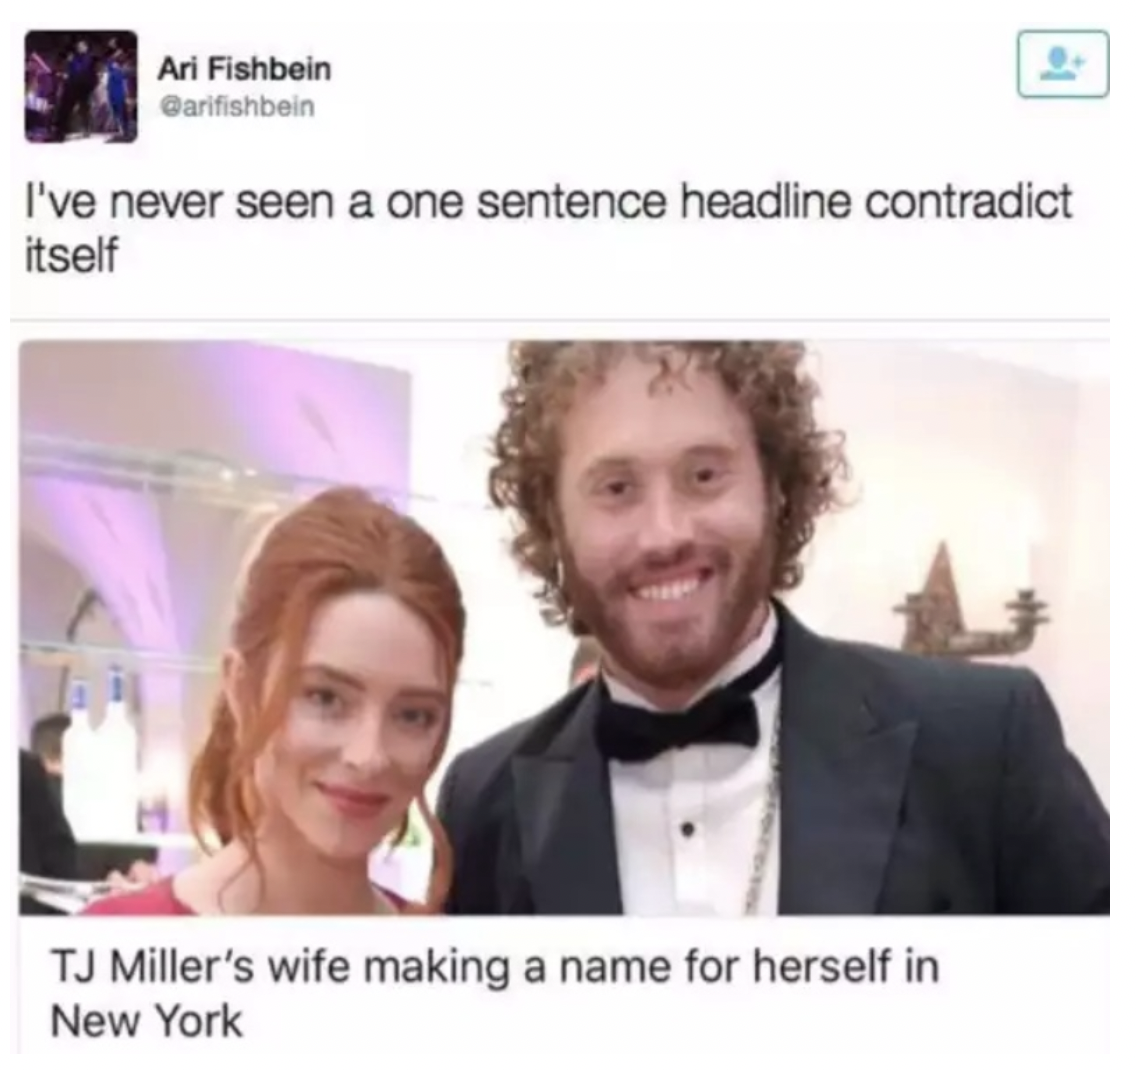 wife making a name for herself - Ari Fishbein I've never seen a one sentence headline contradict itself Tj Miller's wife making a name for herself in New York